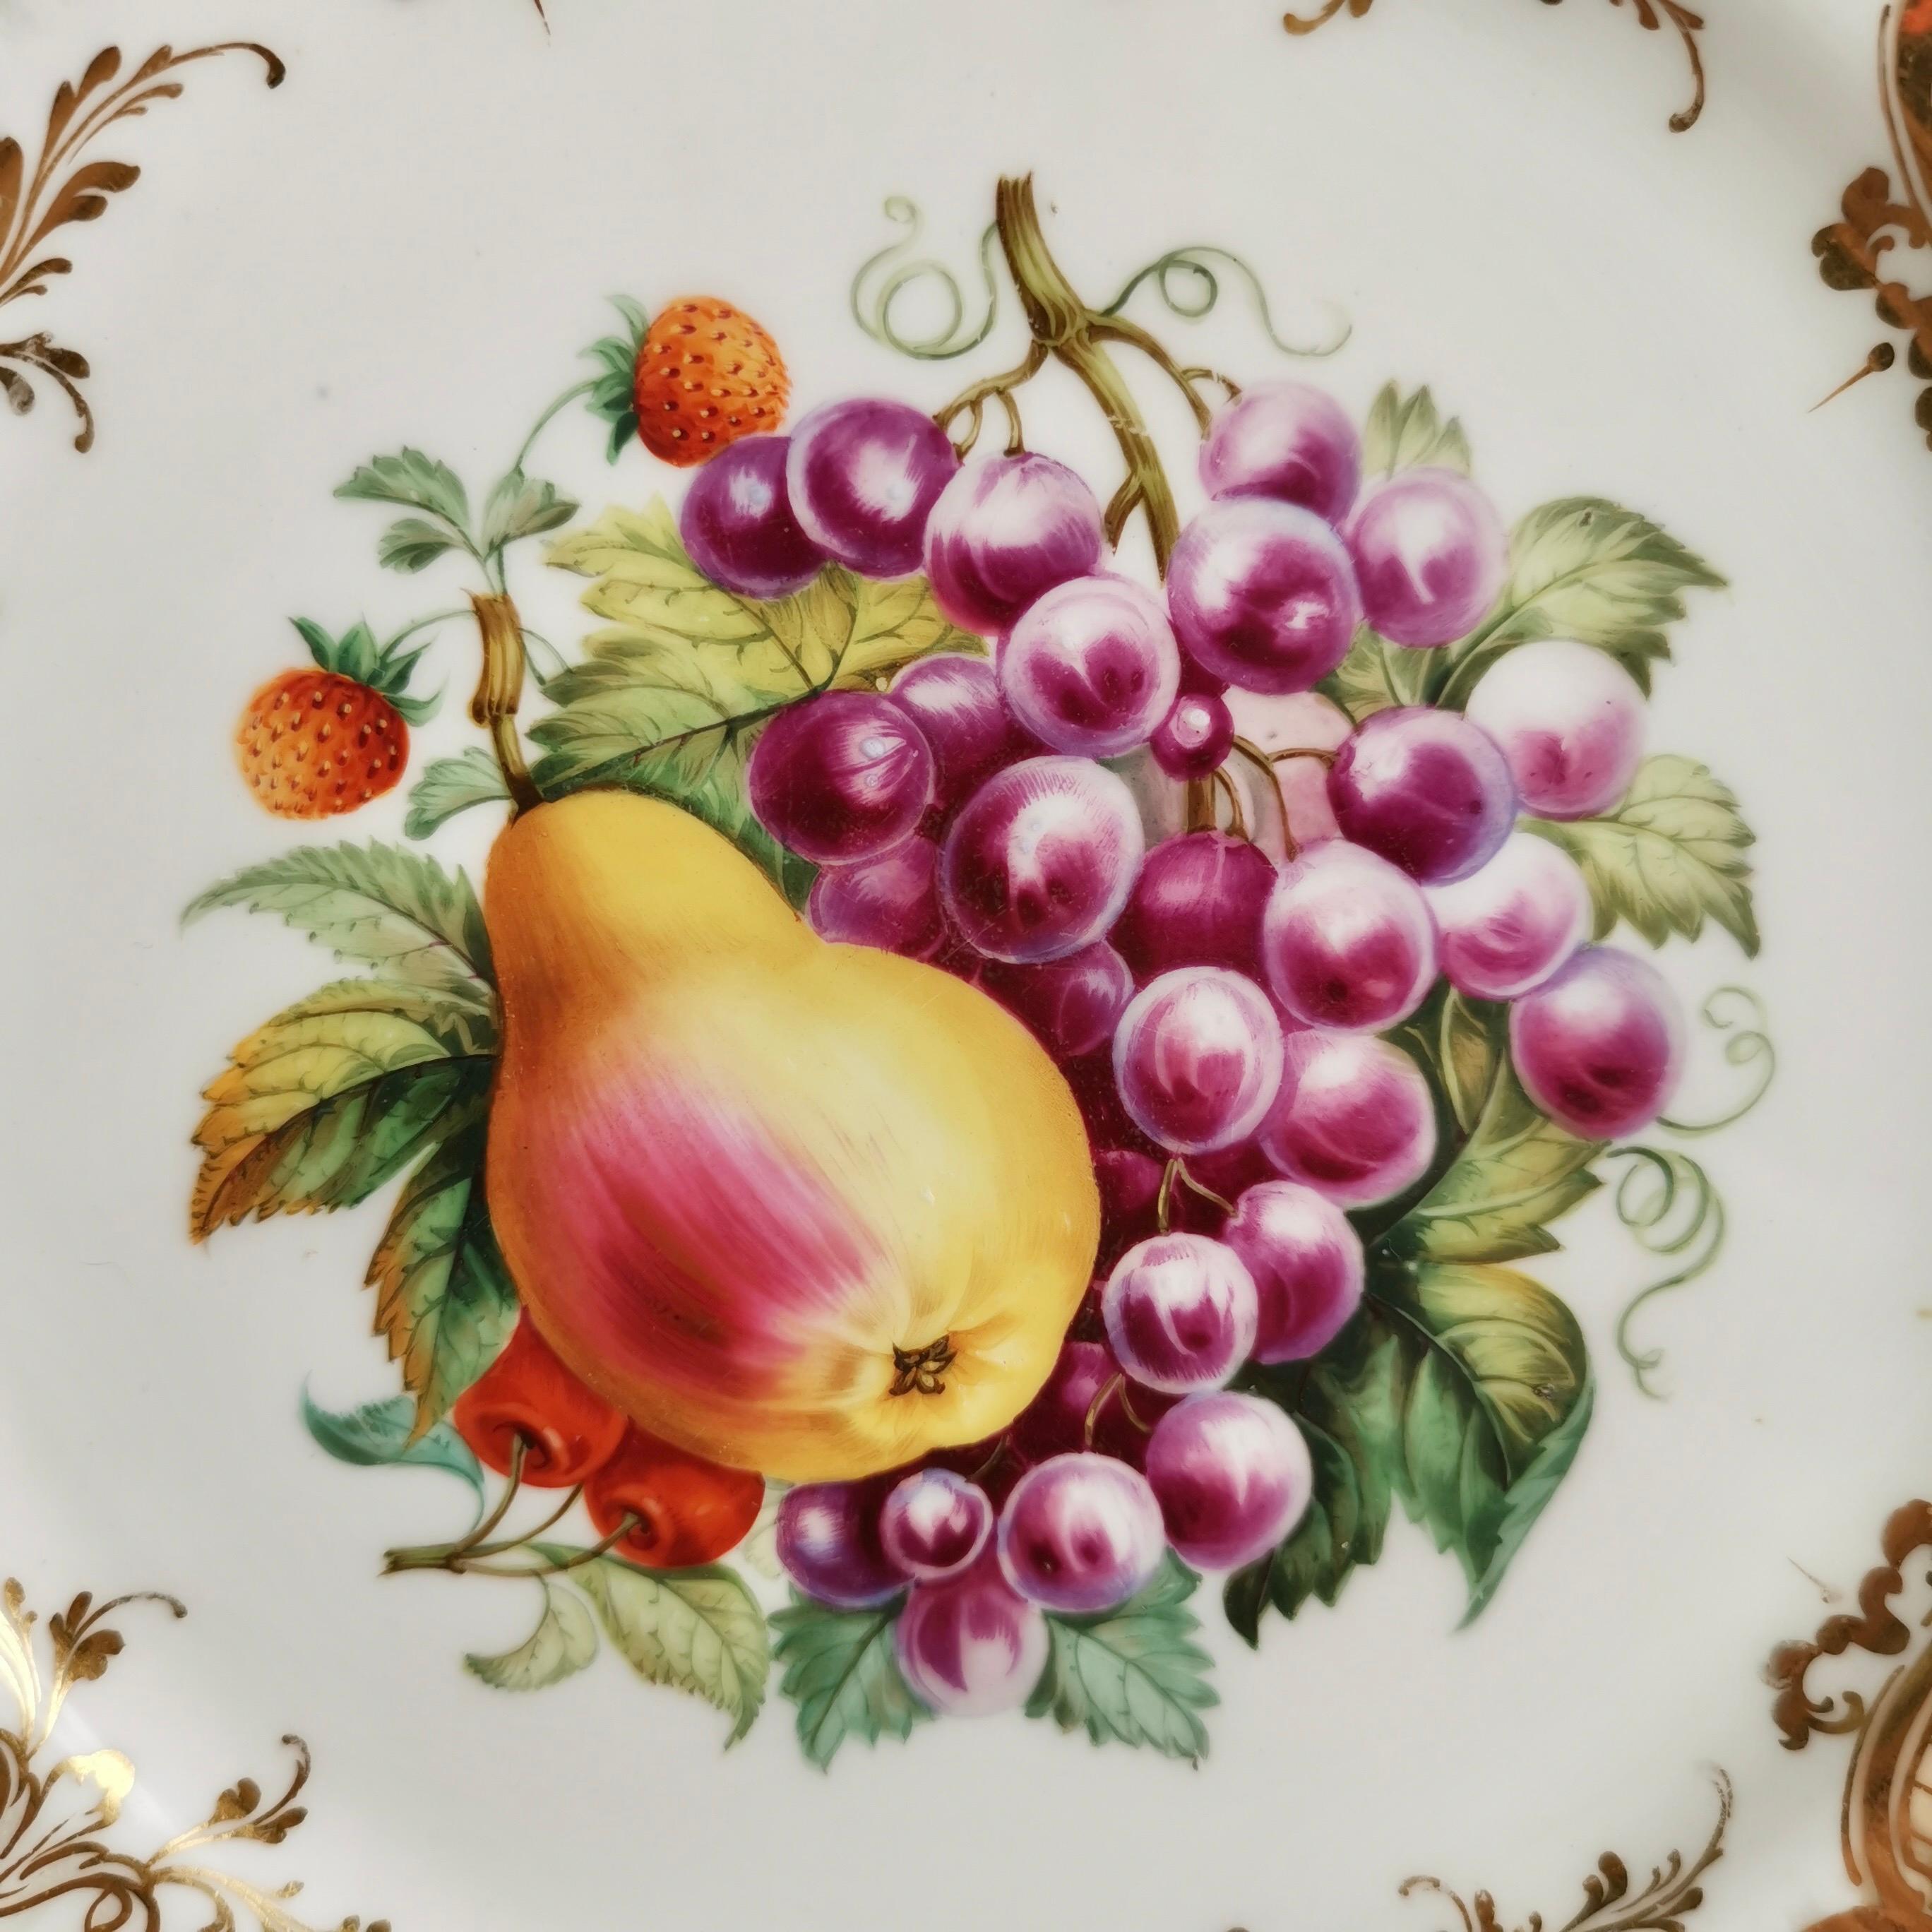 Victorian Ridgway Plate, Emerald Green, Gilt and Sublime Hand Painted Fruits, ca 1853